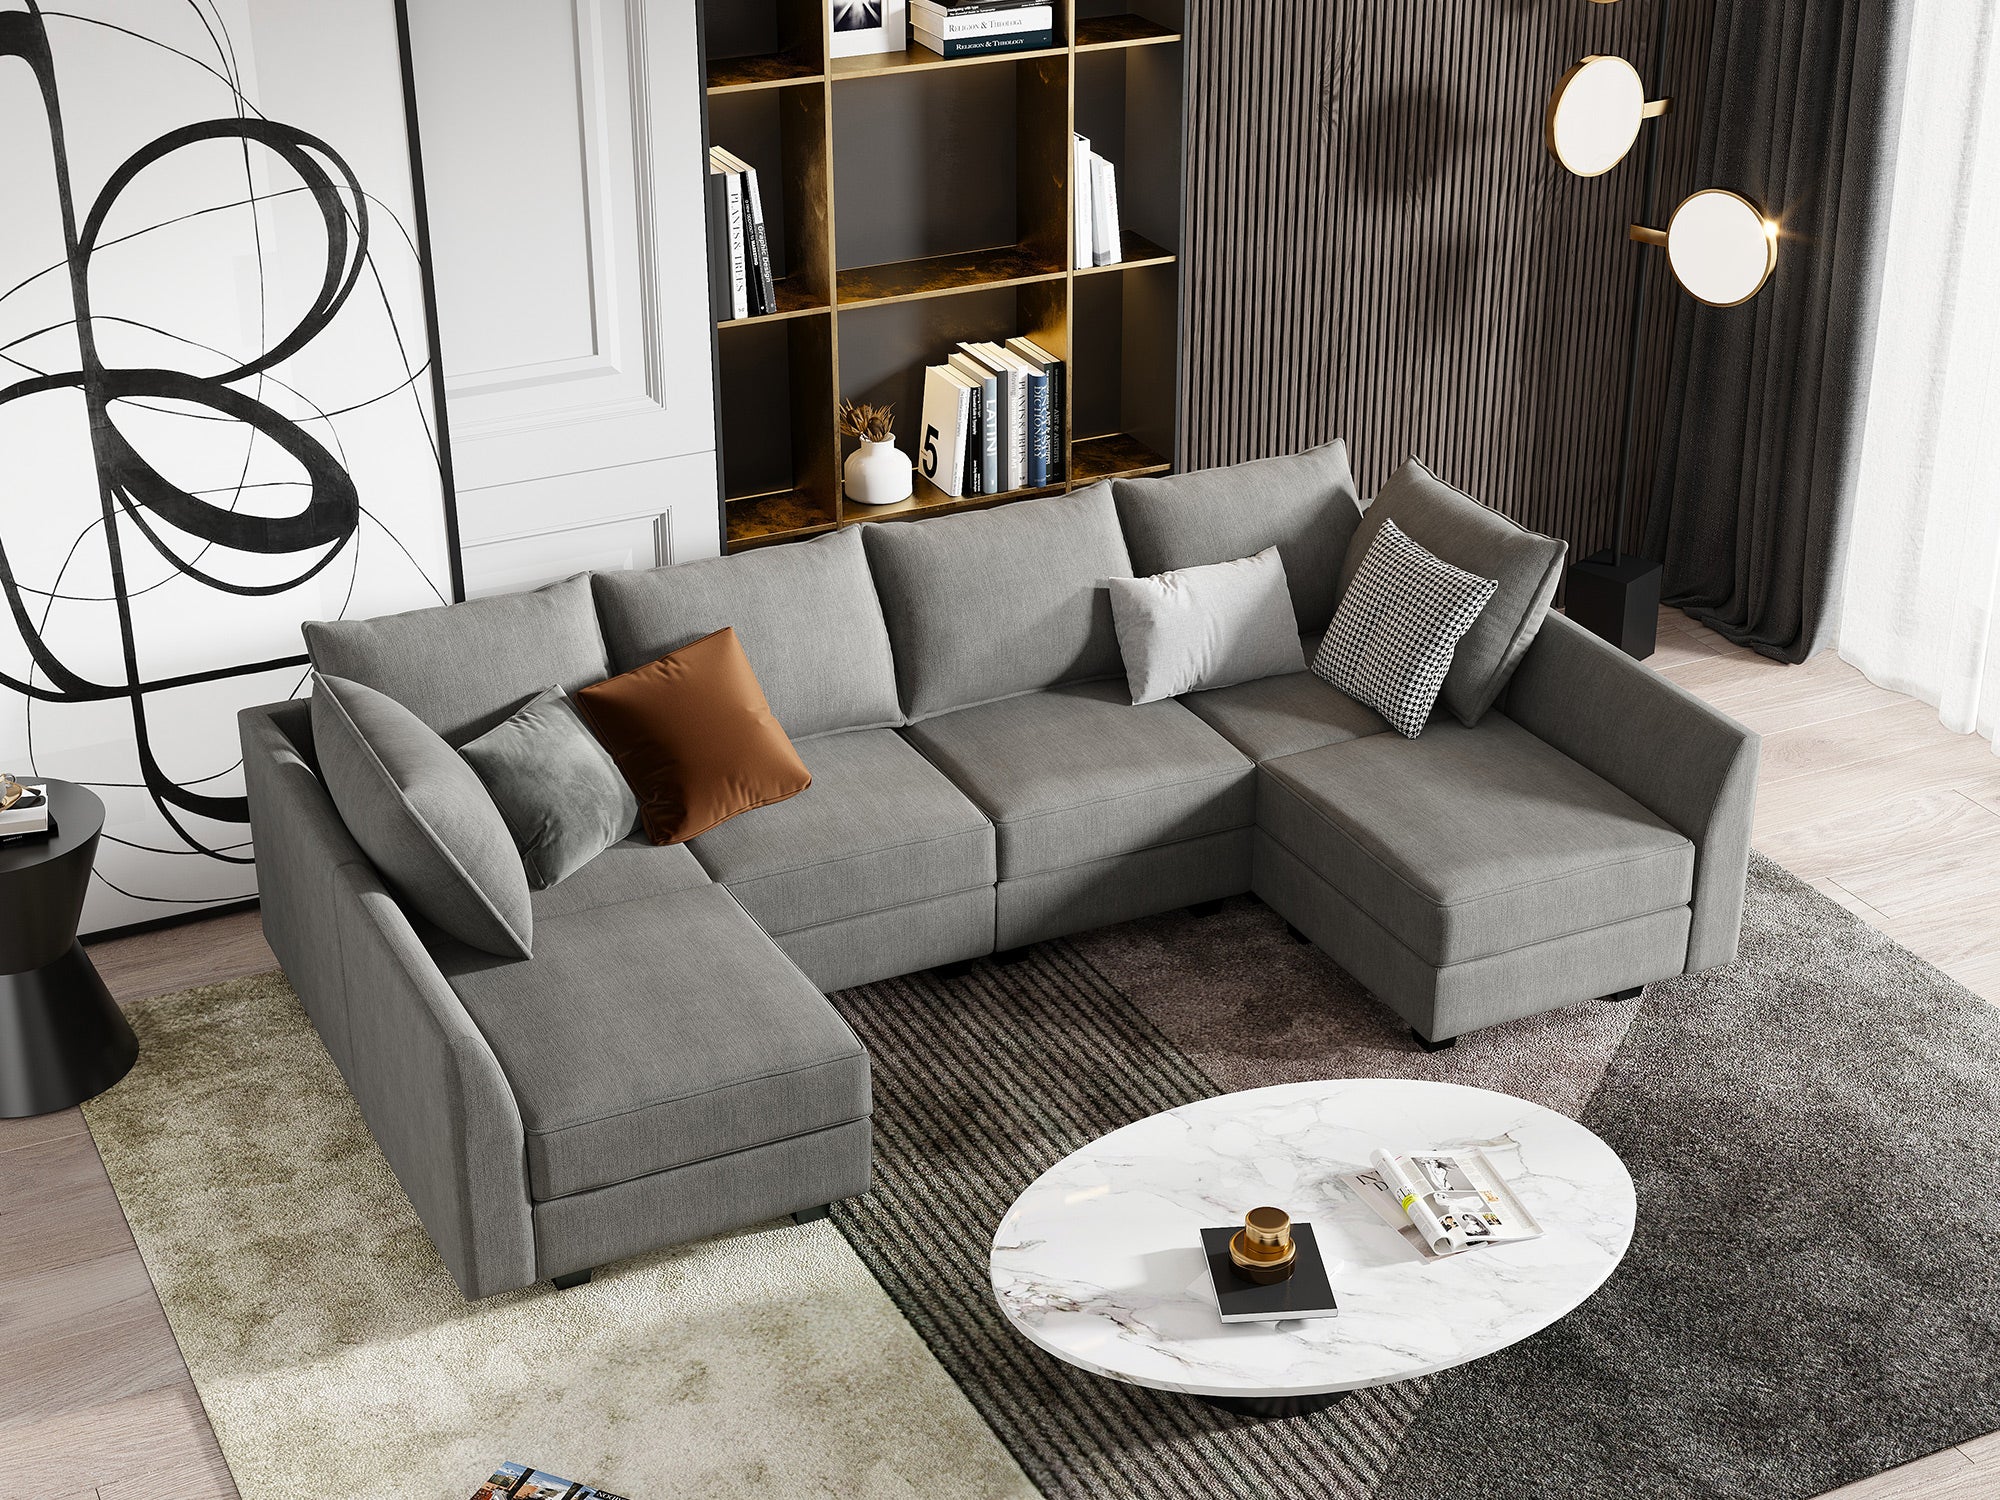 HONAY Polyester Modular Sectional With Storage Seat